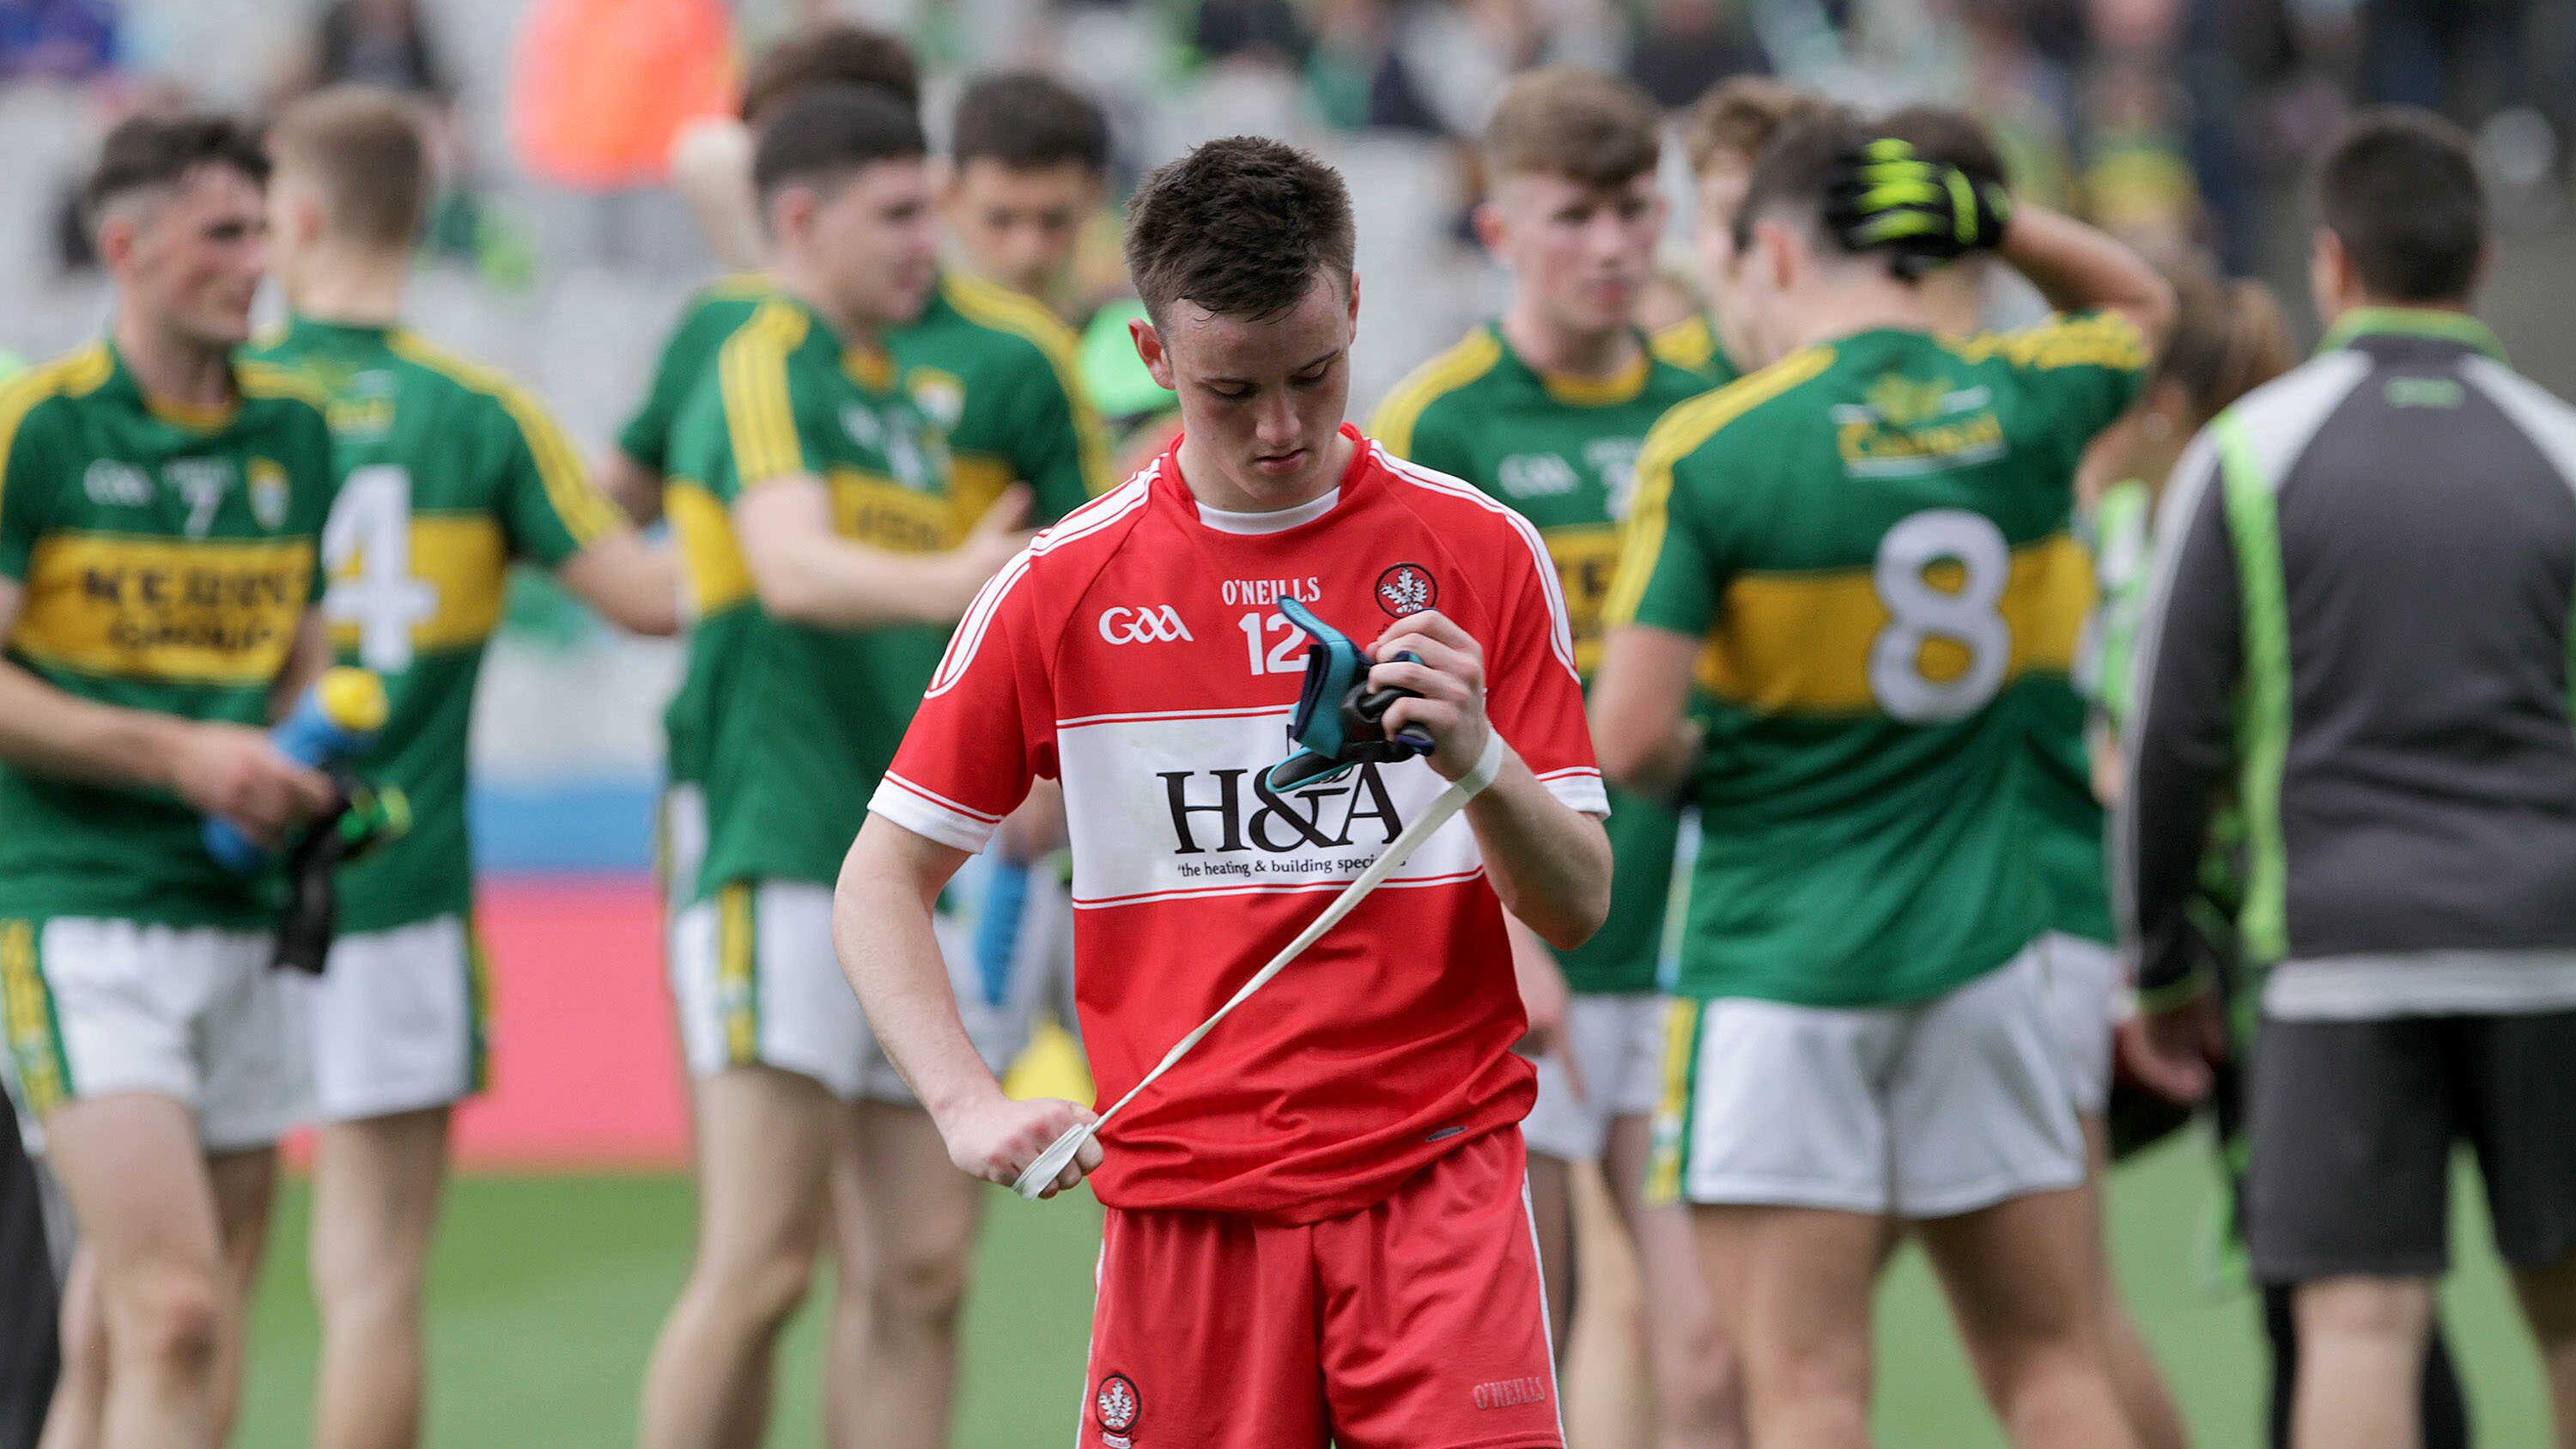 Derry goalscorer Padraig Quigg following his side&rsquo;s defeat to Kerry in yesterday&rsquo;s All-Ireland MFC quarter-final at Croke Park<br/>Picture by Seamus Loughran&nbsp;